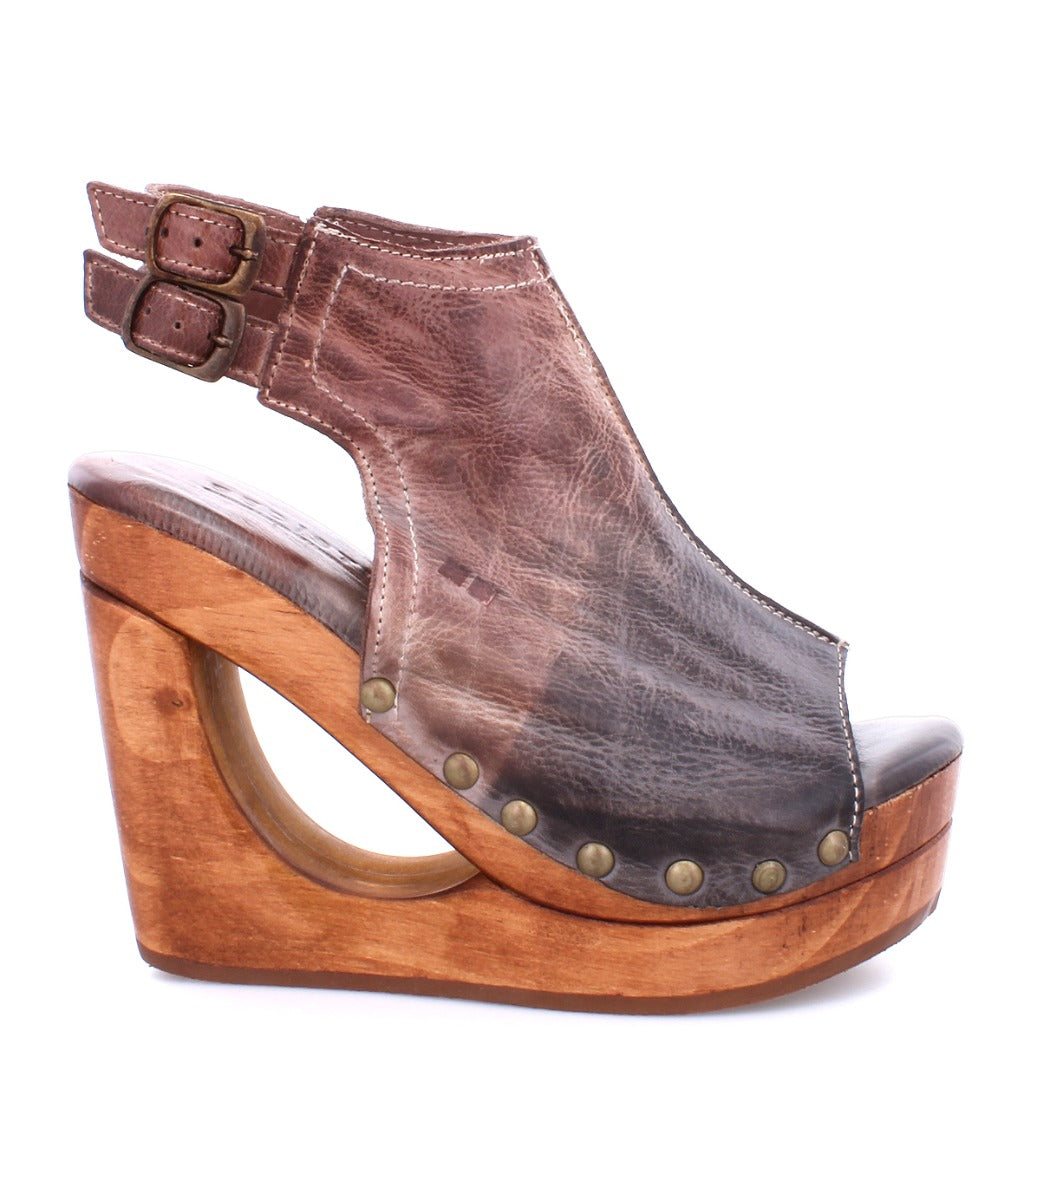 A women's Imelda wedge sandal with a wooden platform from Bed Stu.